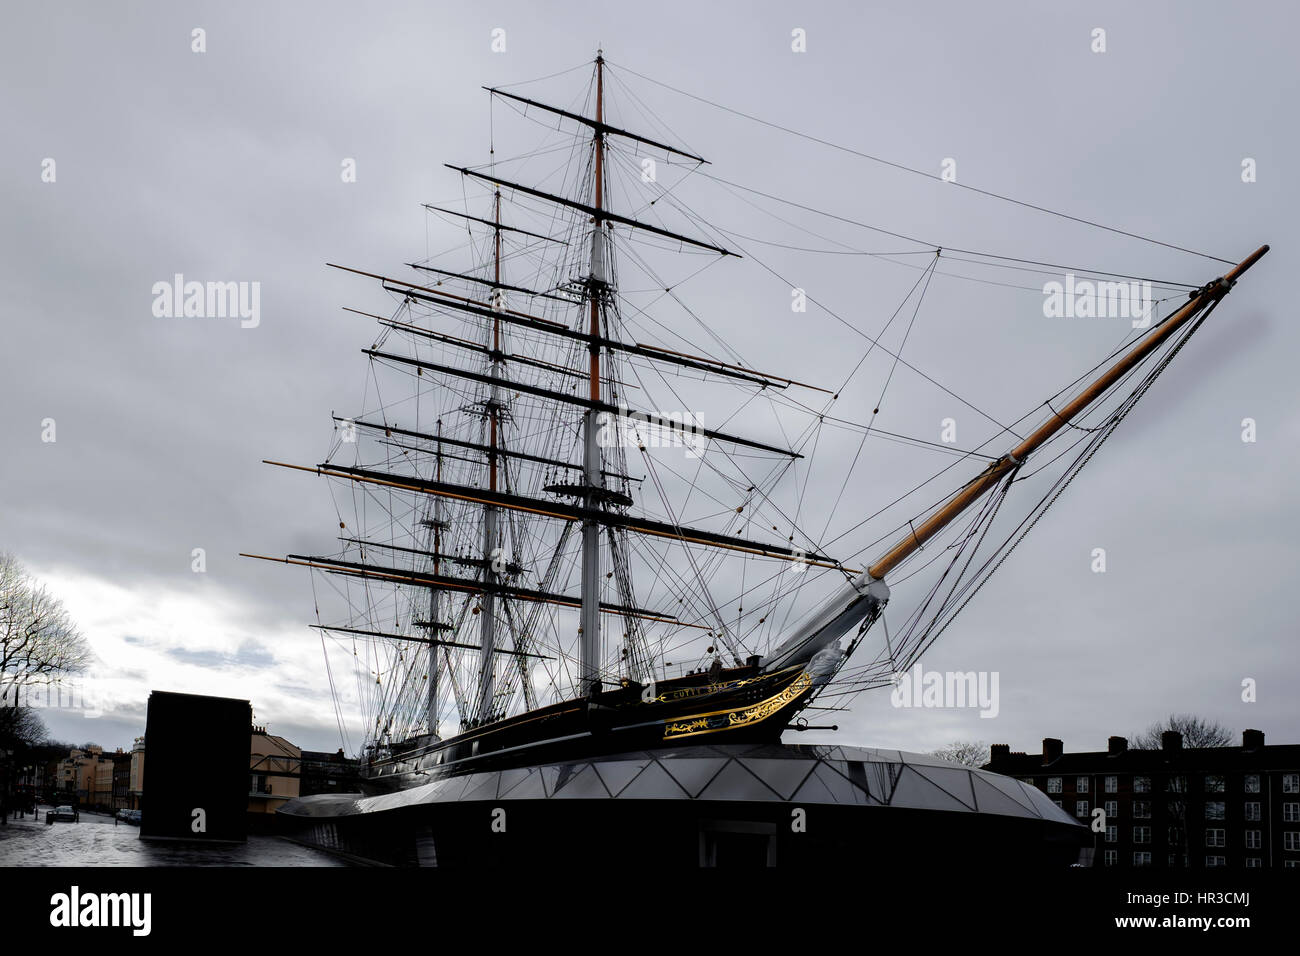 Cutty Sark, Greenwich, London, a tea clipper built in 1869 and the fastest ship in her day. Stock Photo